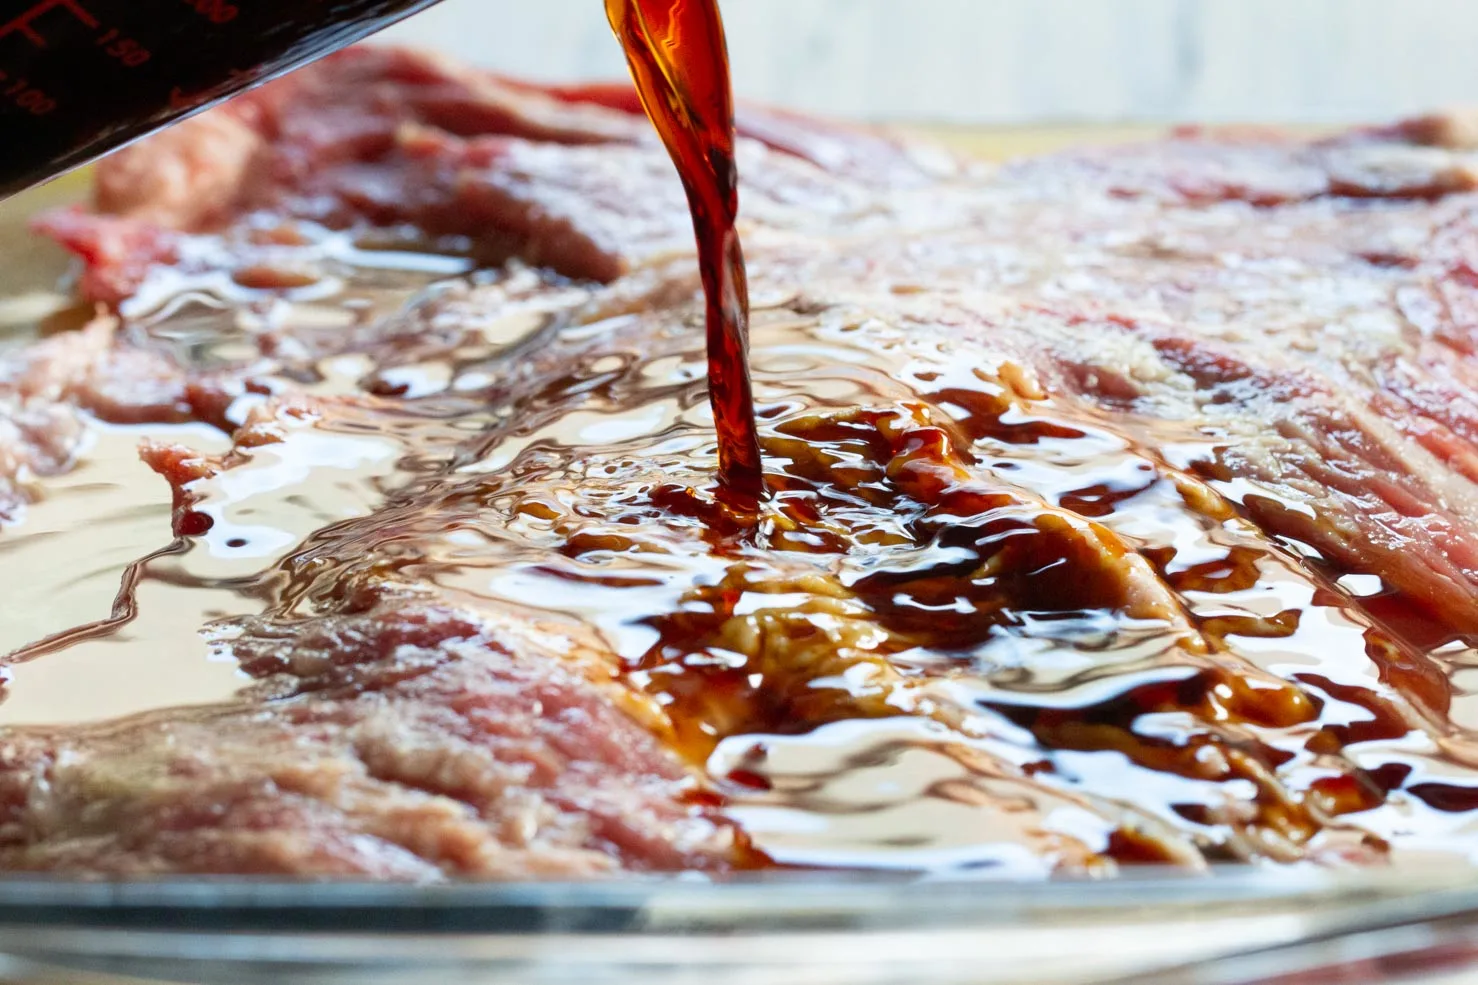 Soy Sauce being poured over the skirt steak for the marinade